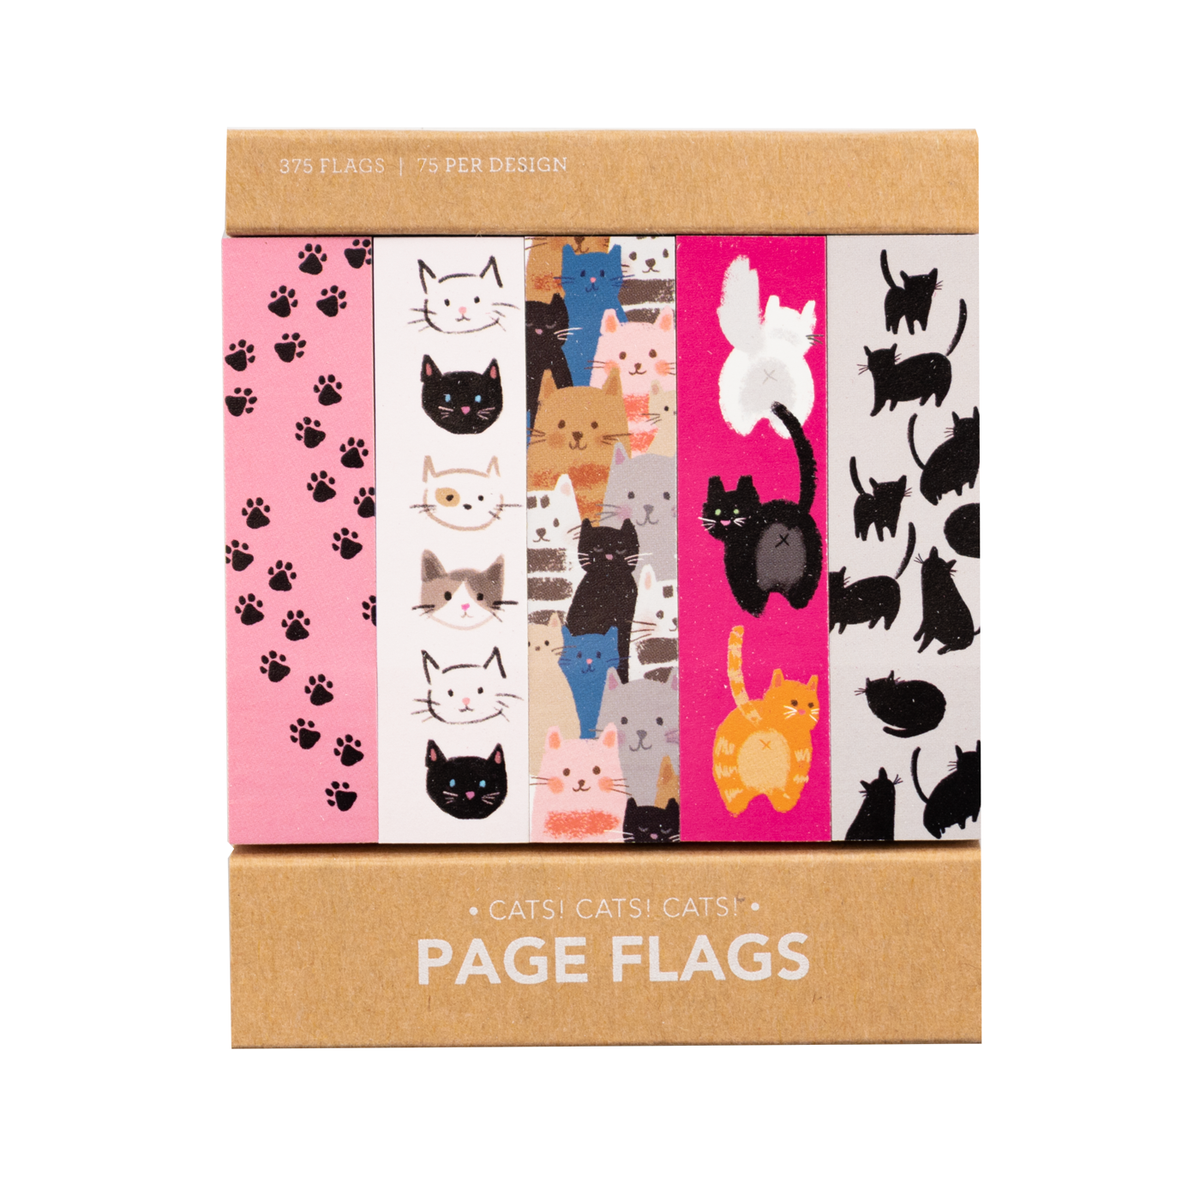 Girl of ALL WORK - Page Flags - Adhesive flags - Cats Cats Cats